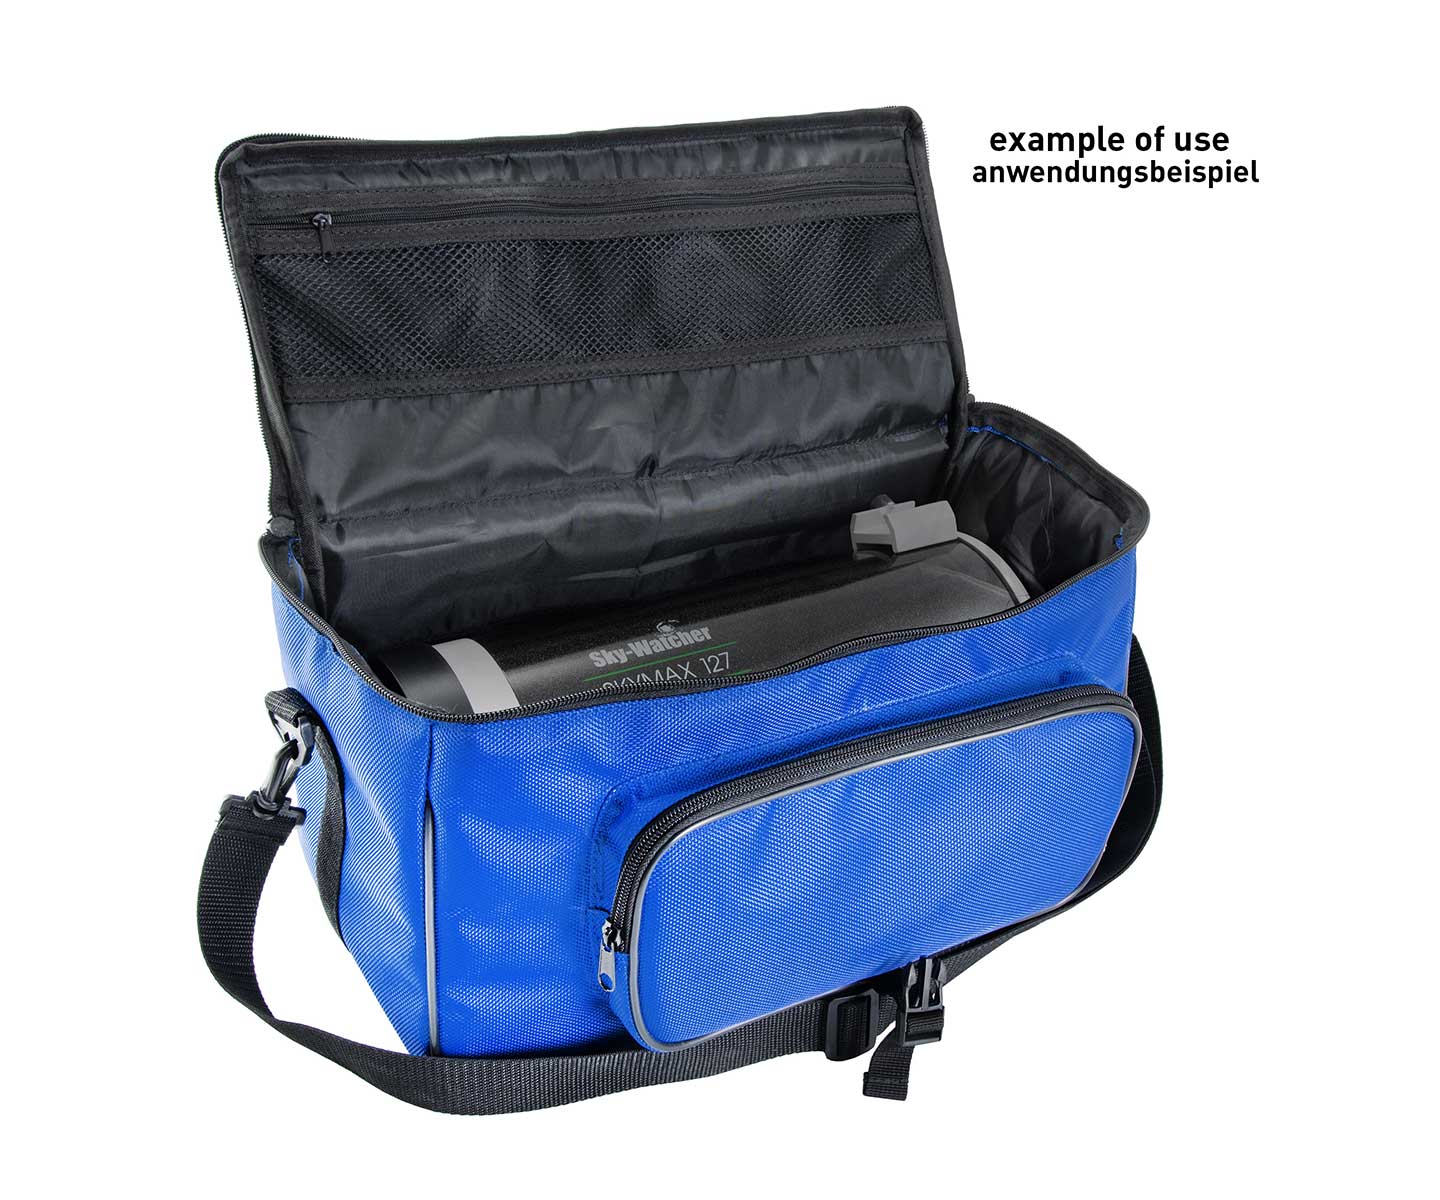     TS-Optics padded Carrying Case for accessories, telescopes and telephoto lenses - 40x22x22 cm   [EN]  